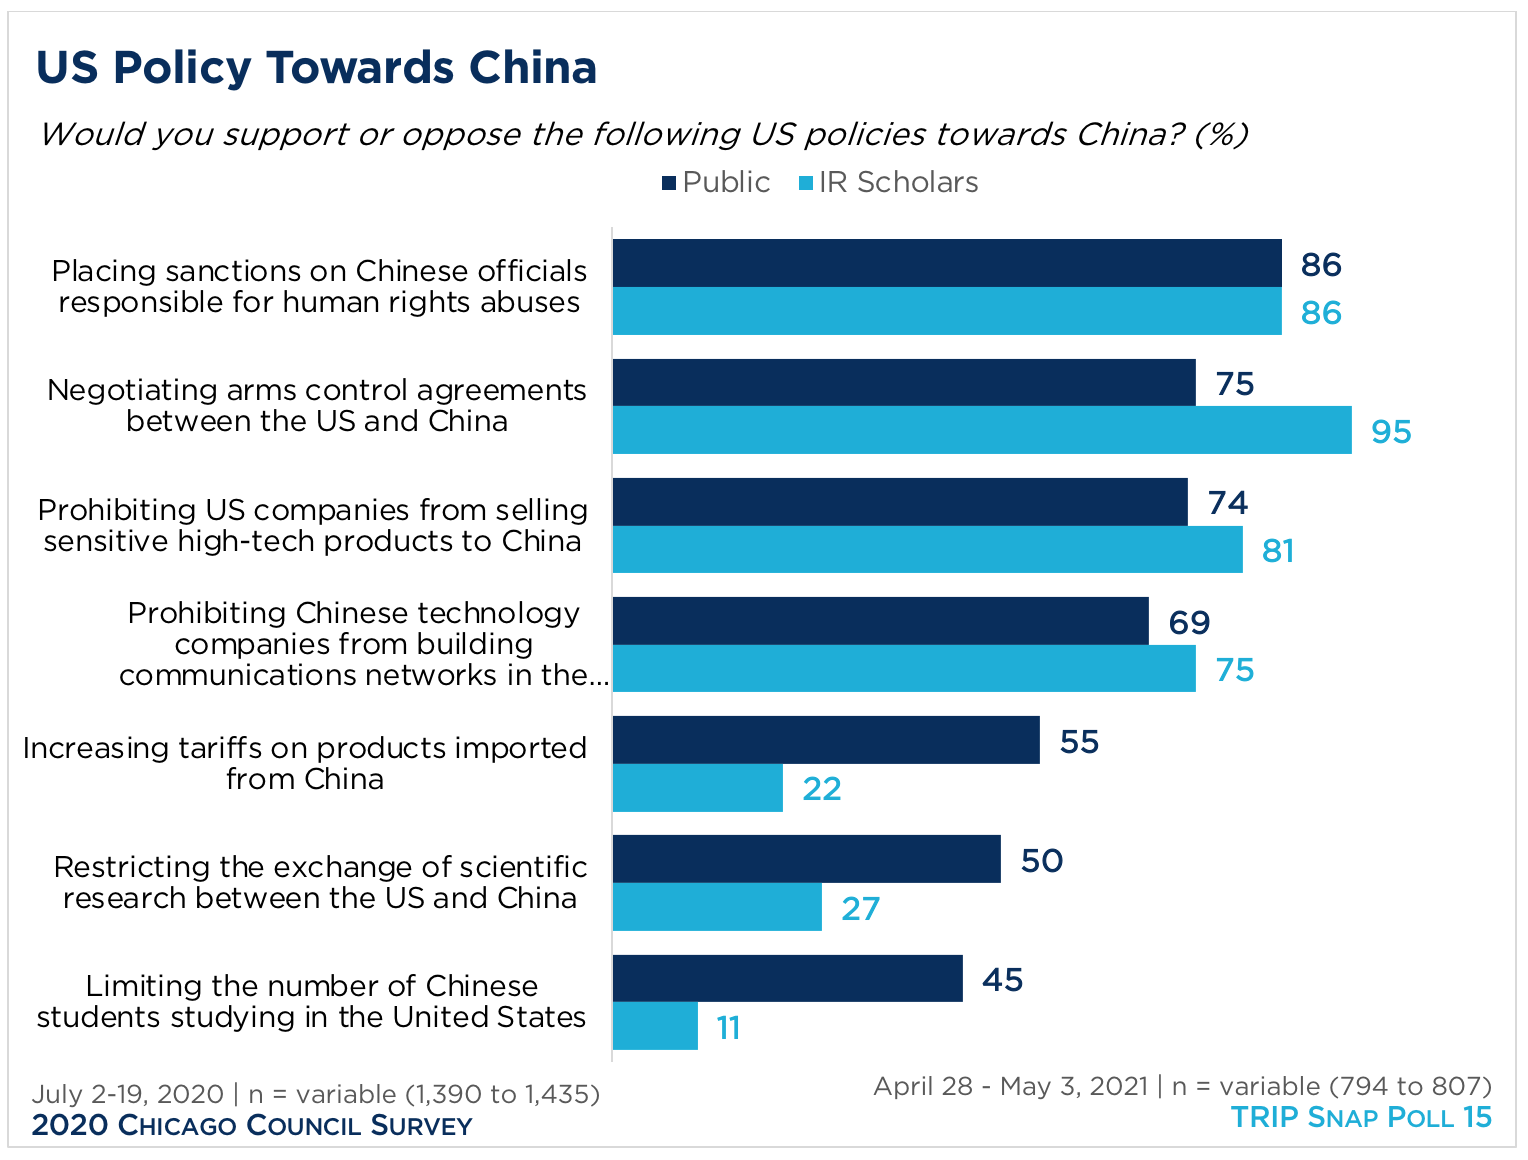 "A bar graph showing public opinion of US policy towards China"